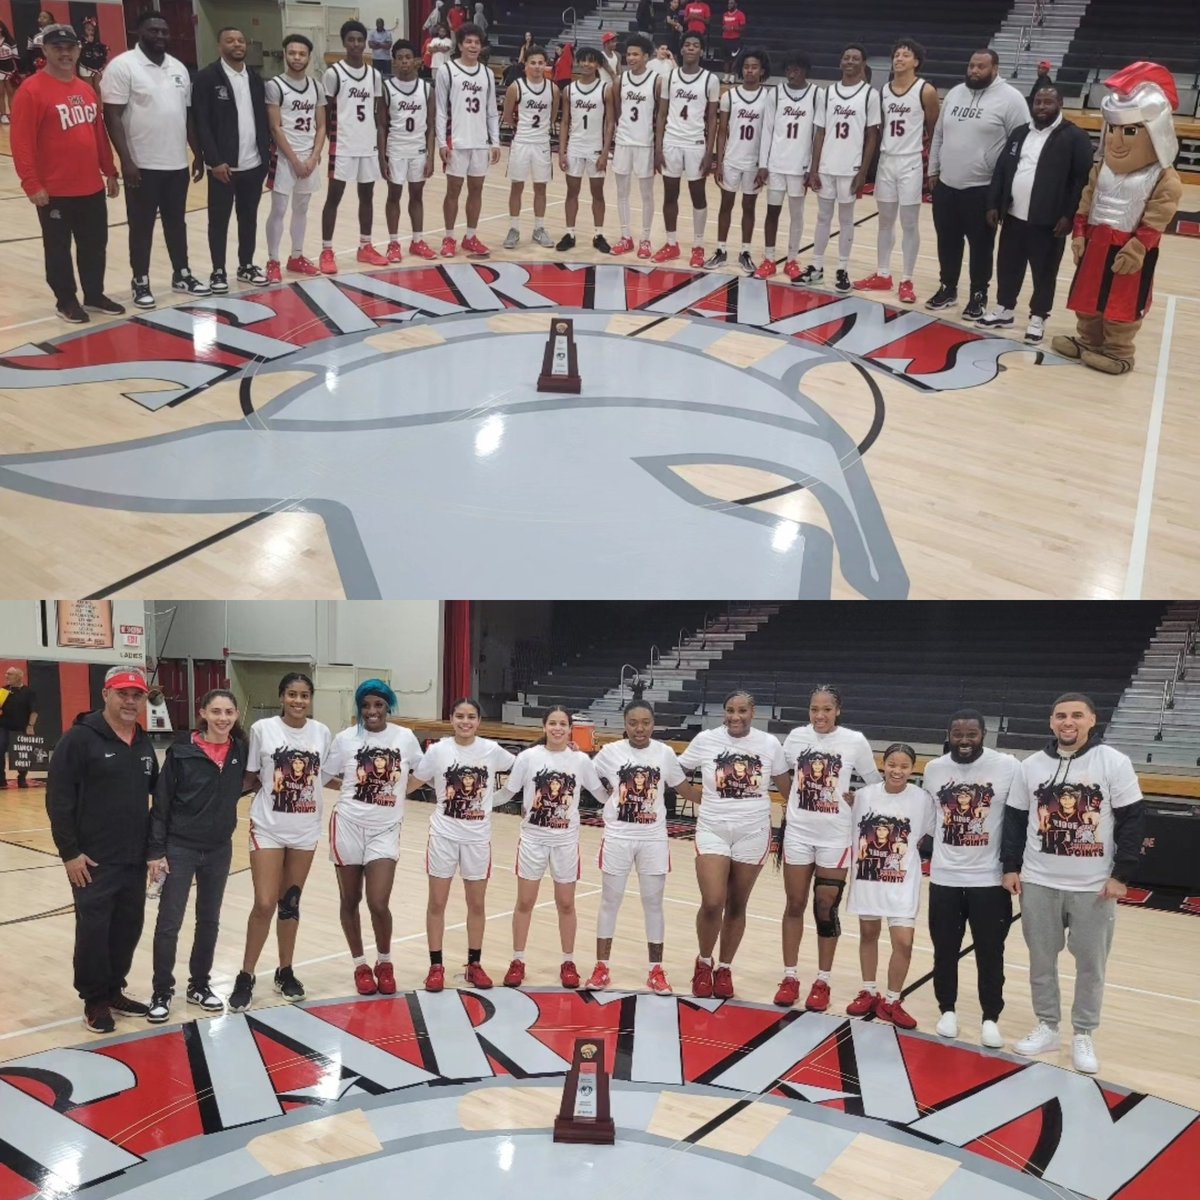 Congratulations to our Girls and Boys Basketball Teams on winning the 2024 @FHSAA District 16 Championship #RidgePride #SouthridgeYourBestChoice #SouthridgeWeAreOne @MDCPS